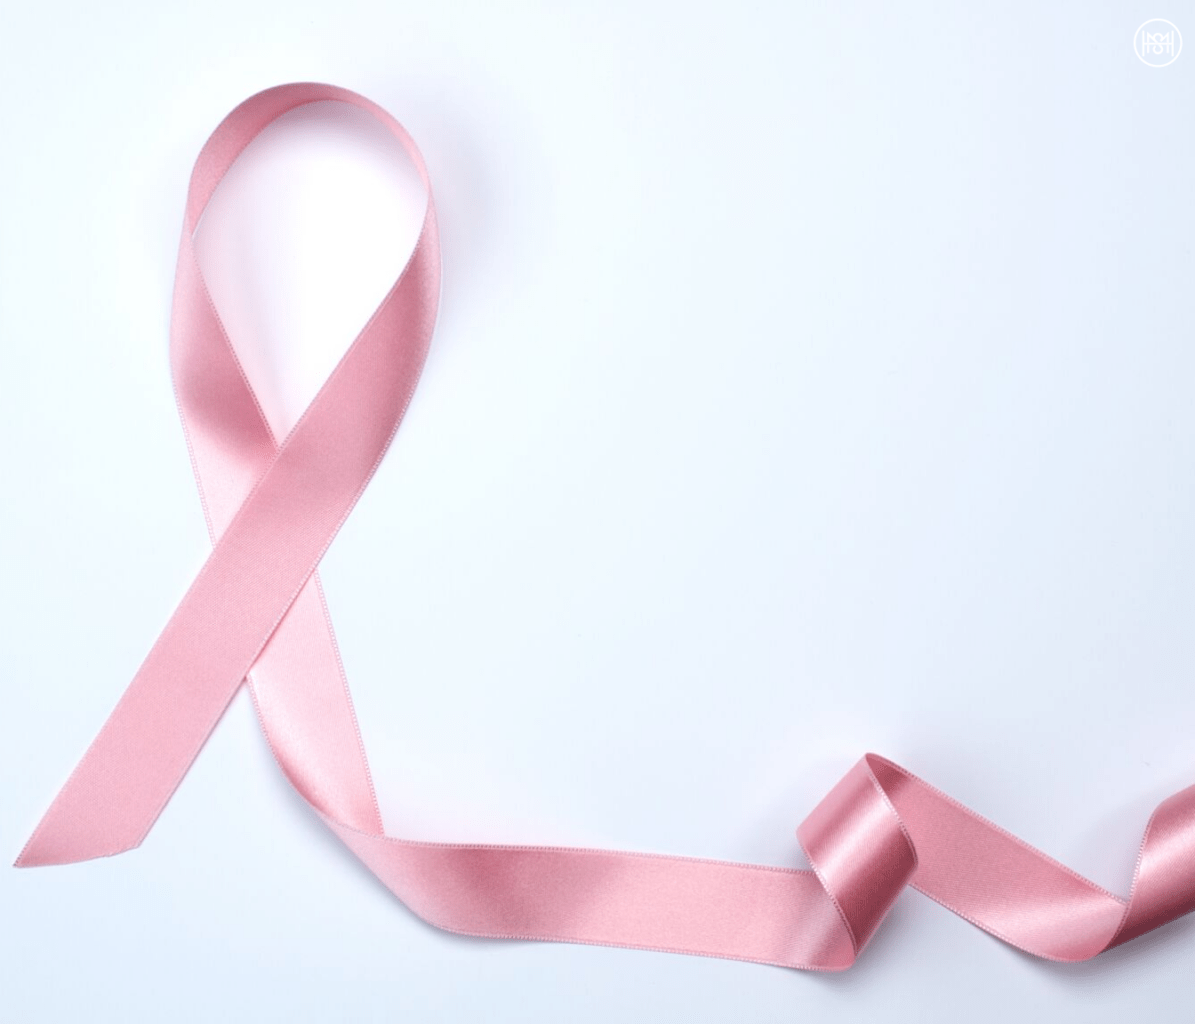 Detecting Breast Cancer